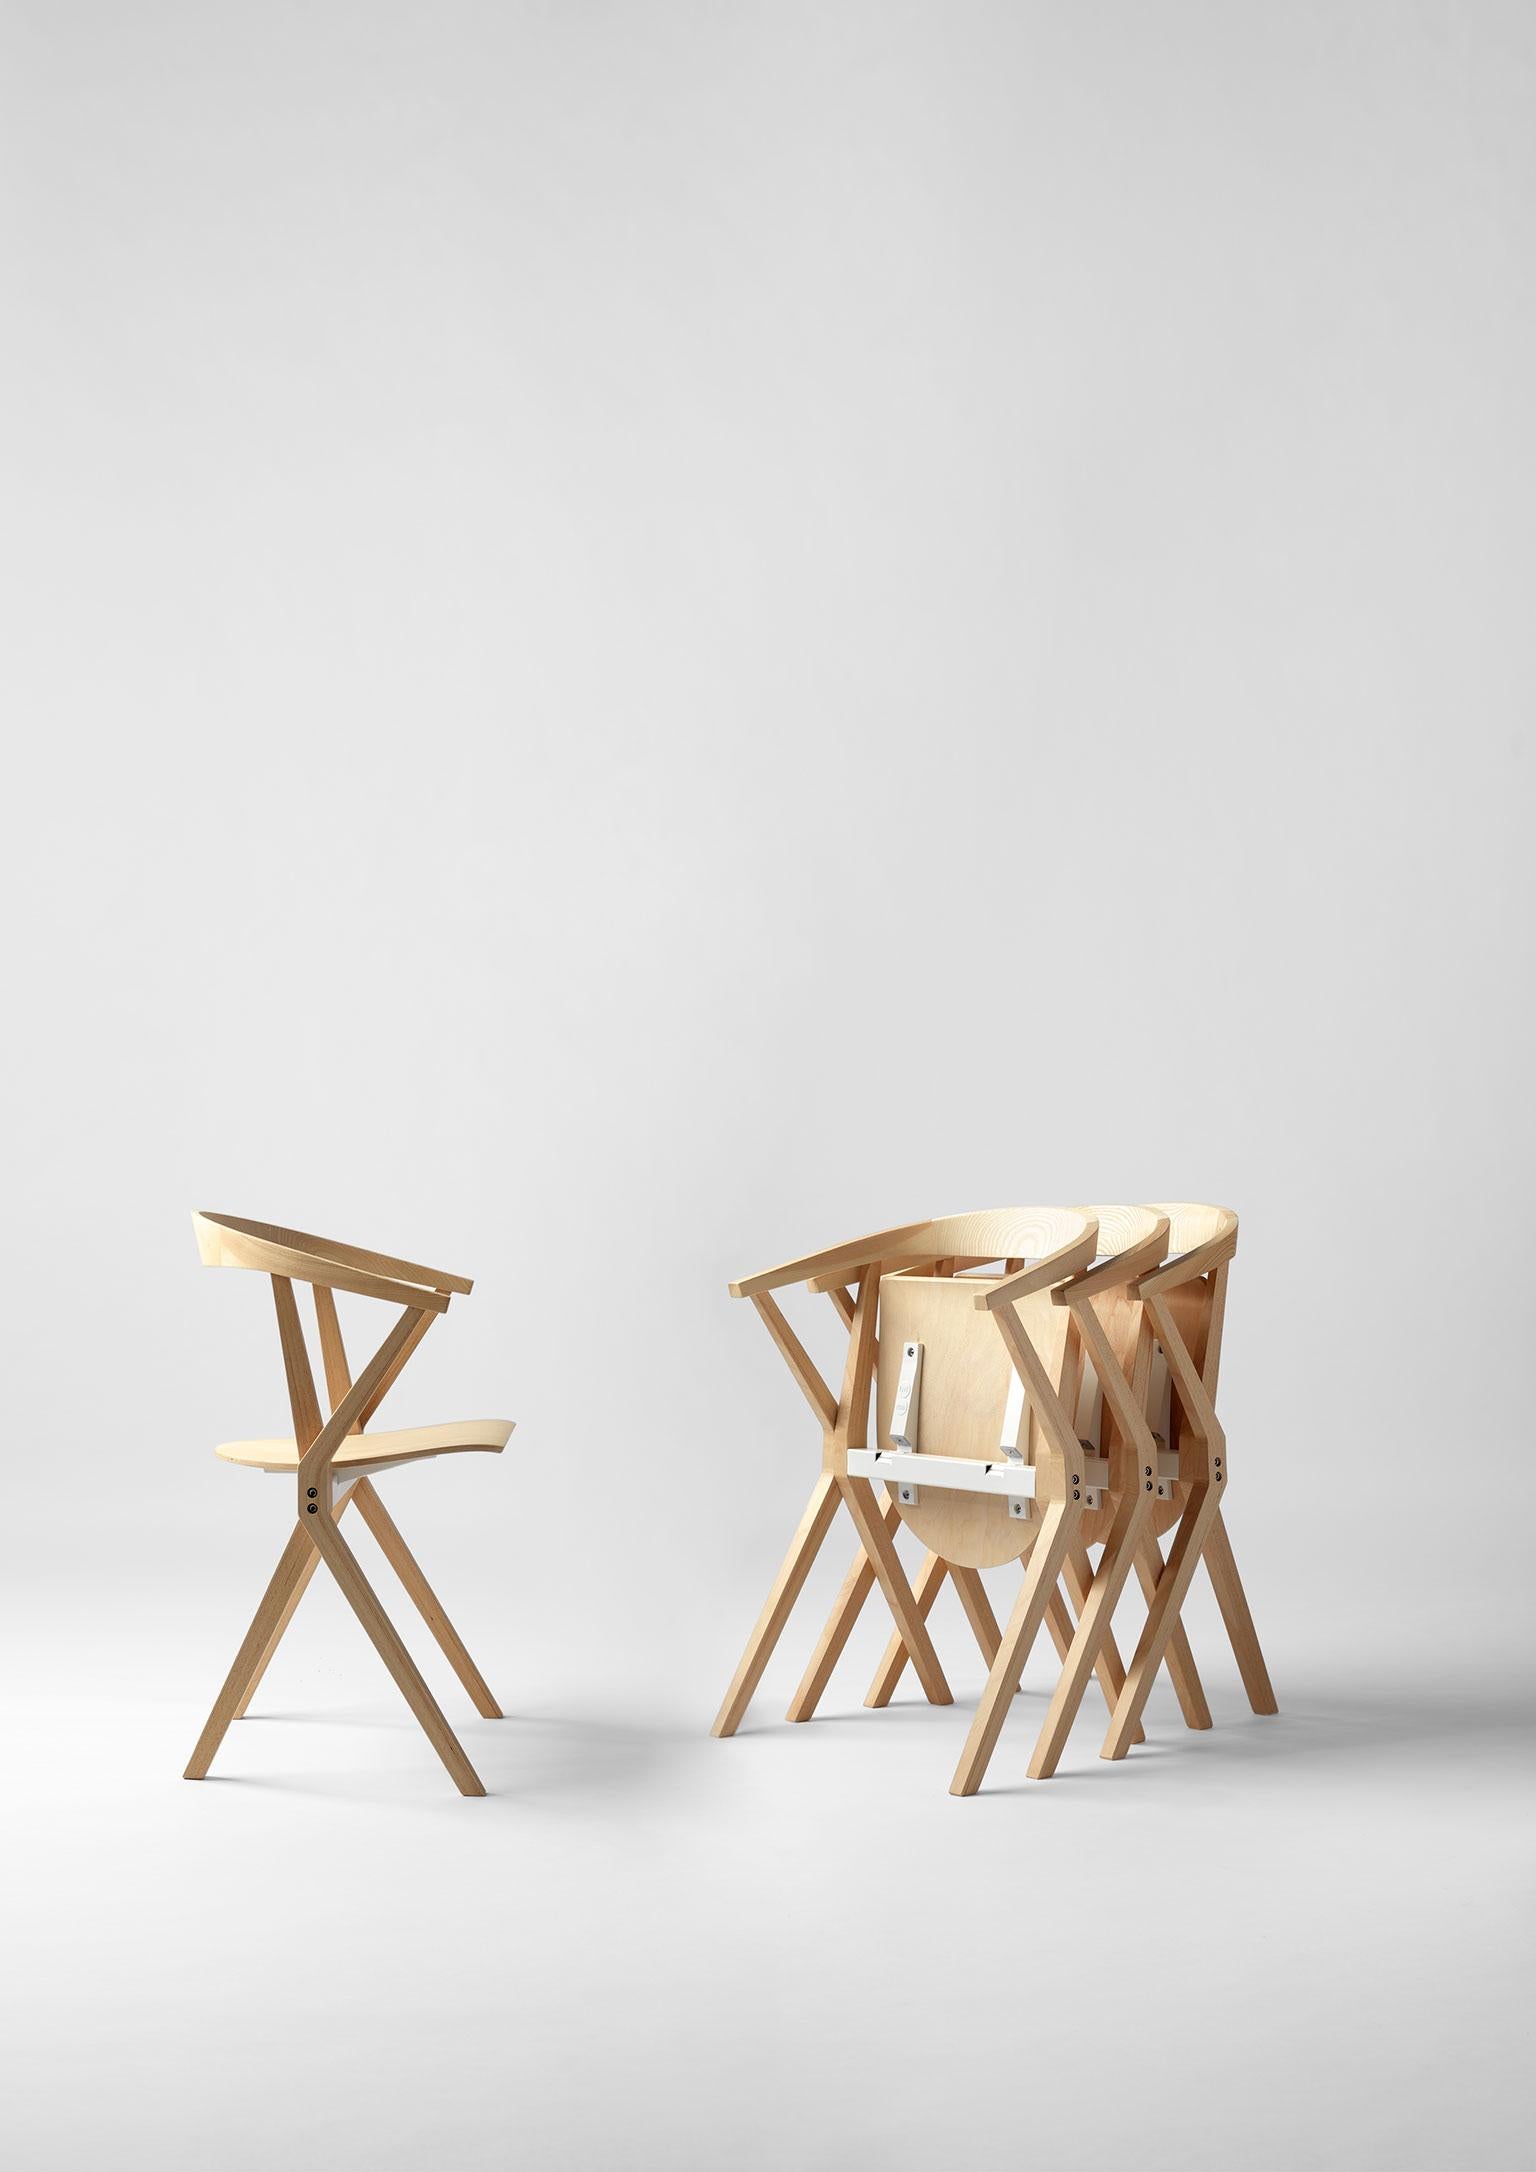 Chair B designed by Konstantin Grcic for BD Barcelona. Konstantin Grcic is a German Industrial designer known for creating mass-manufactured items, such as furniture and household products. Described as having a pared-down aesthetic, his functional